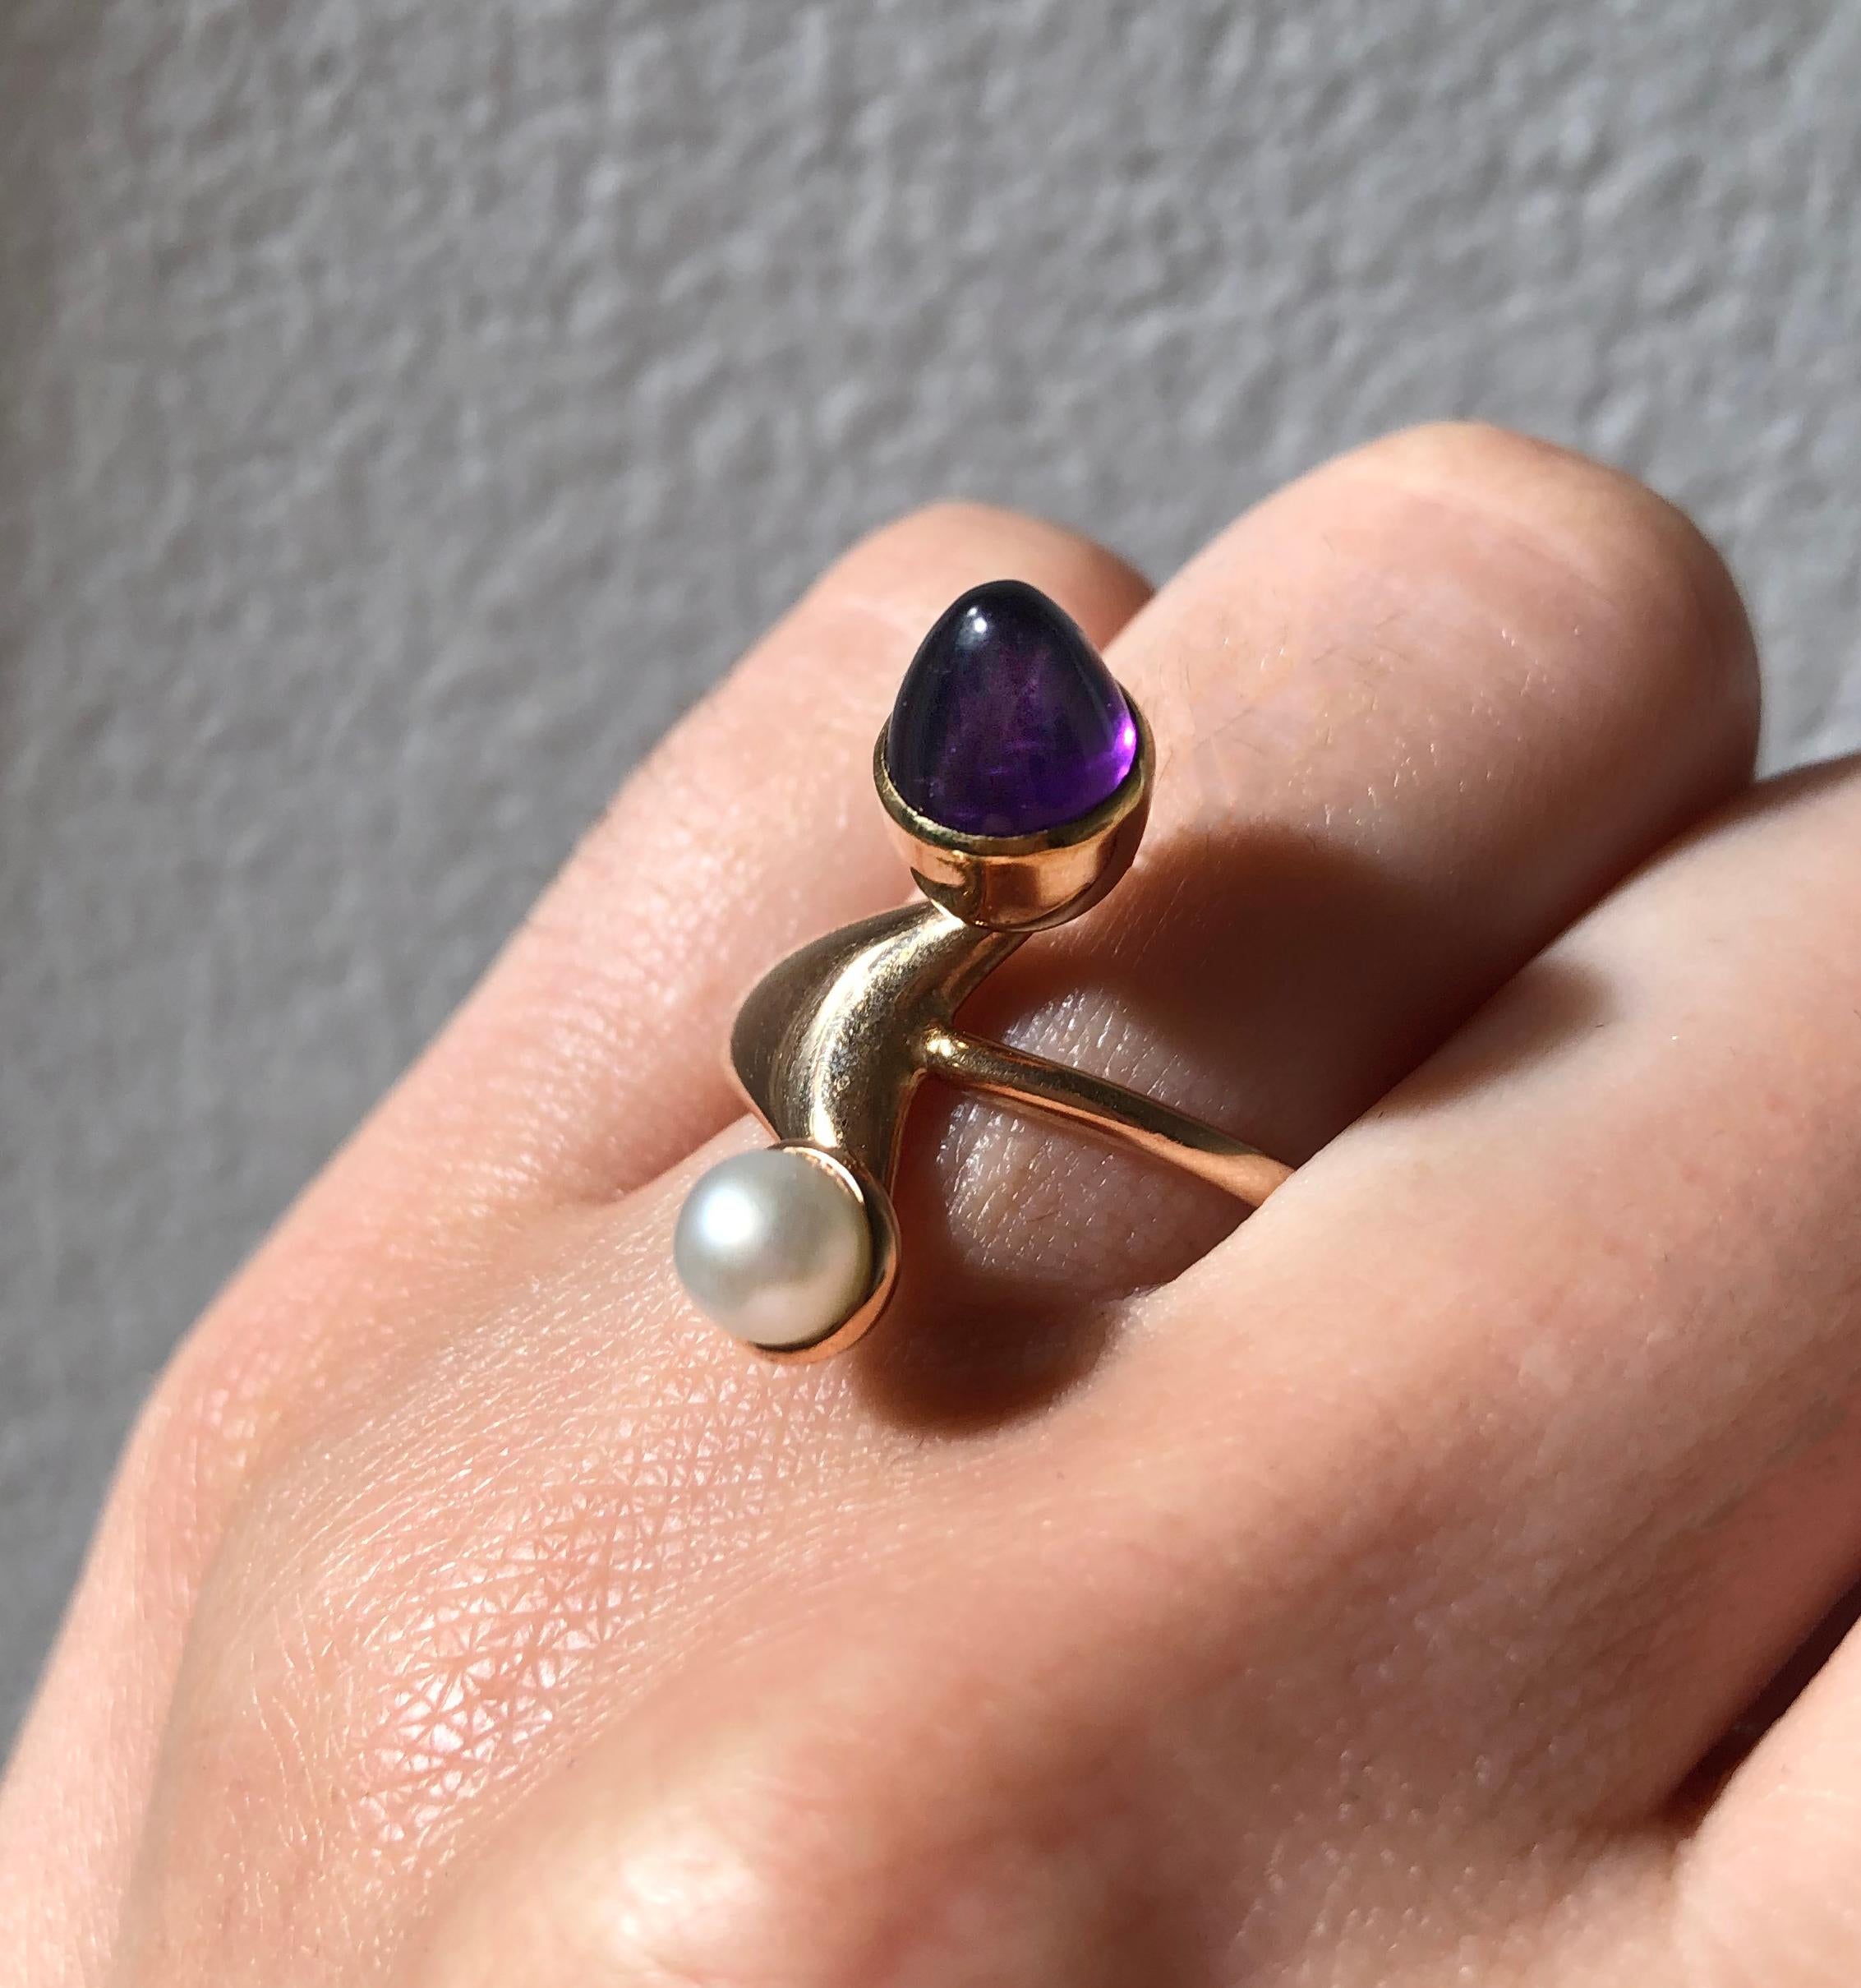 An amethyst, pearl and 14k gold ring, by Bent Knudsen, c. 1970s. Signed Denmark Bent K, stamped 585 8.  Ring size 6.75. This ring can be resized.

Bent Knudsen (1924 - 1996) was a renowned Danish modernist silversmith who, having worked at Hans